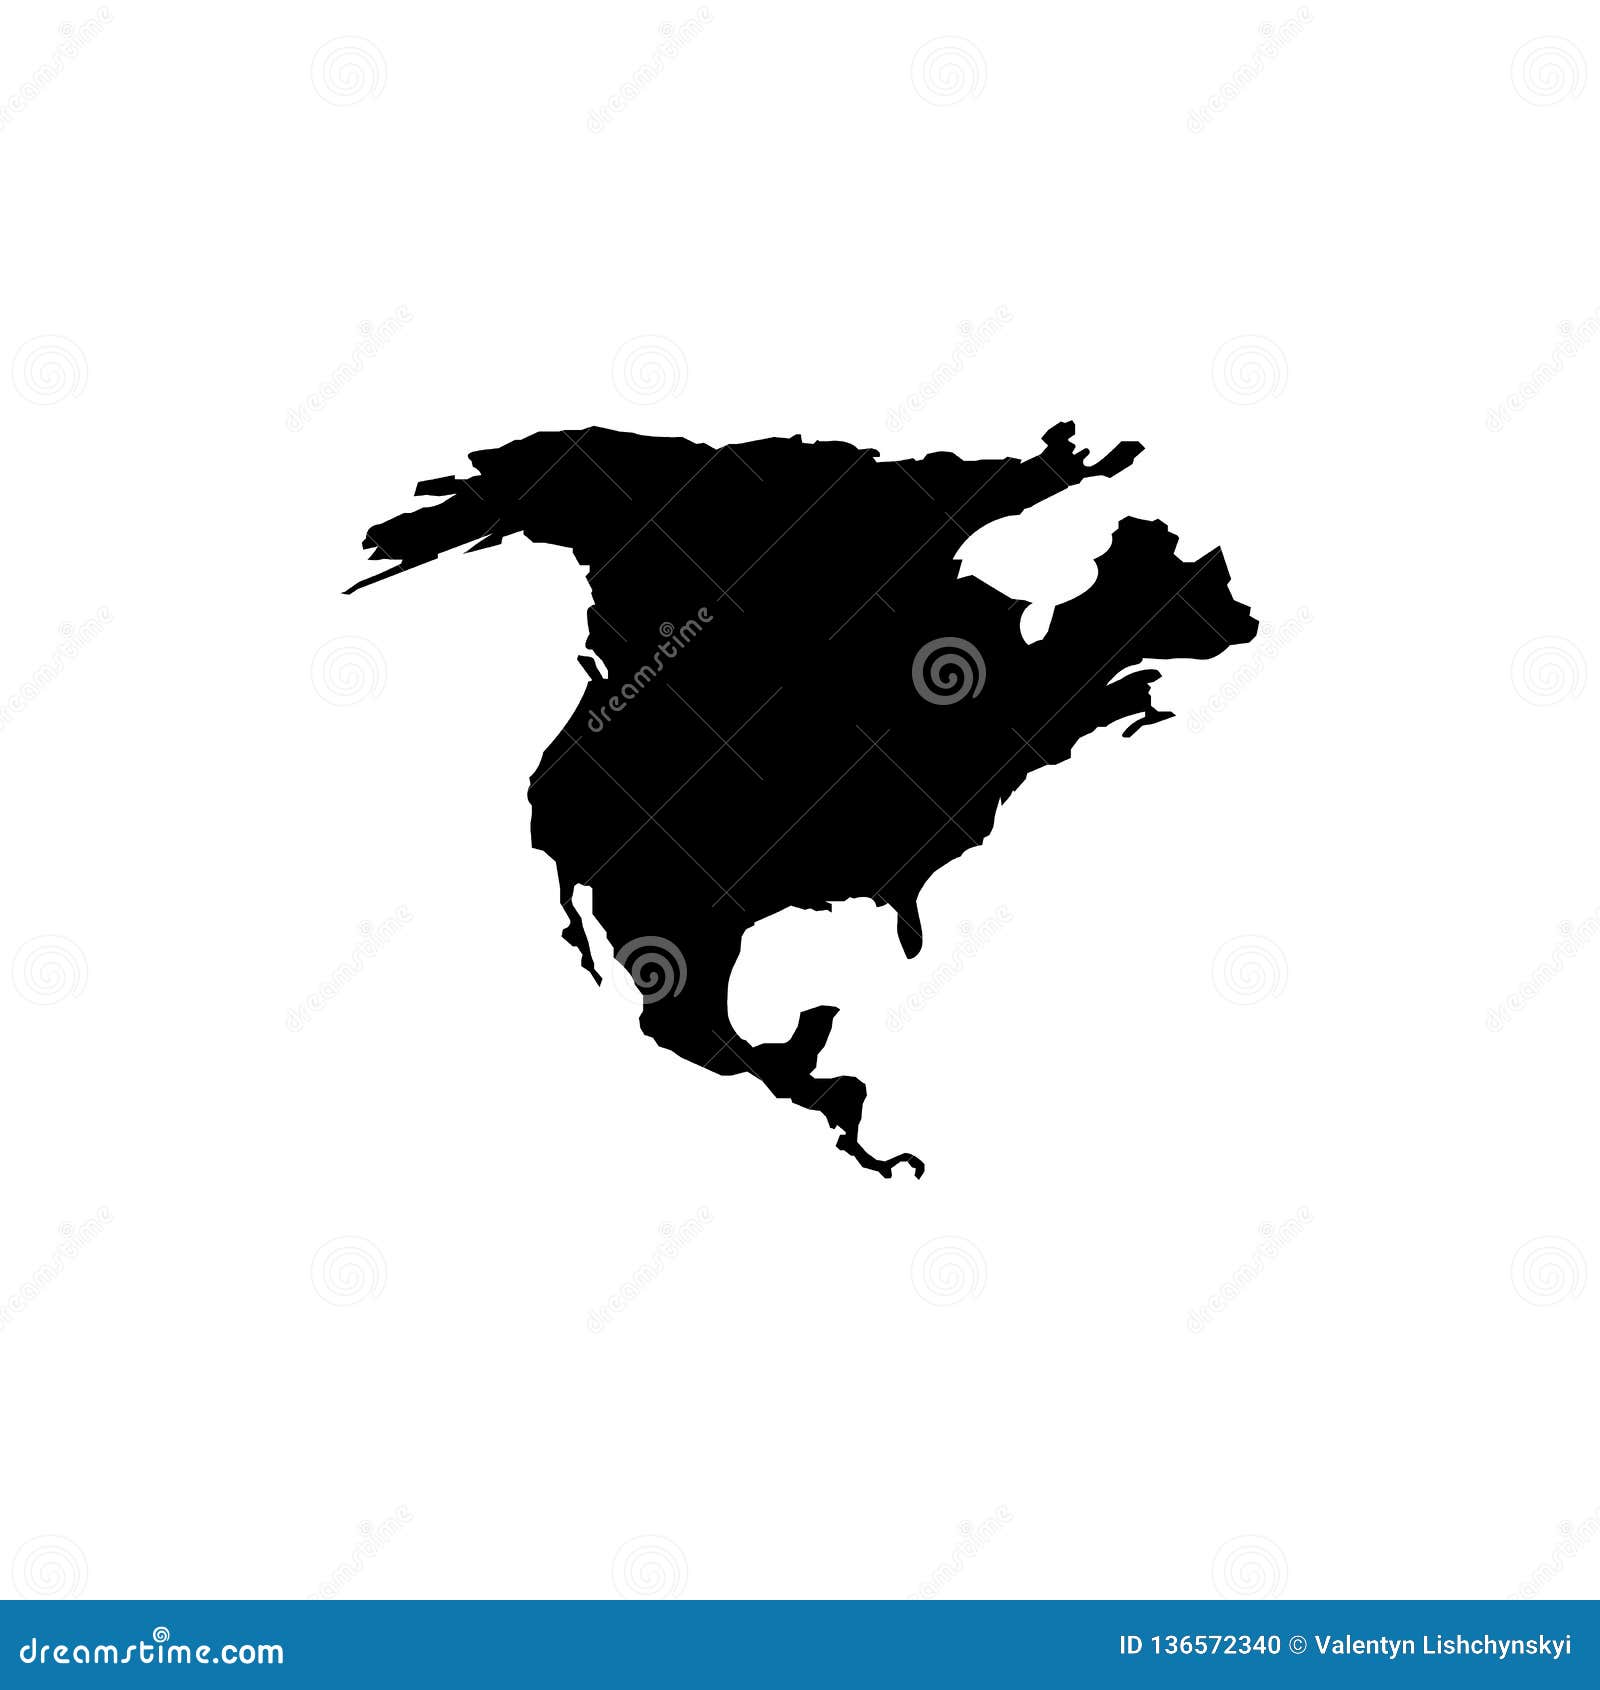 Download North America Map. Flat Simple Design. Vector EPS10 Stock ...